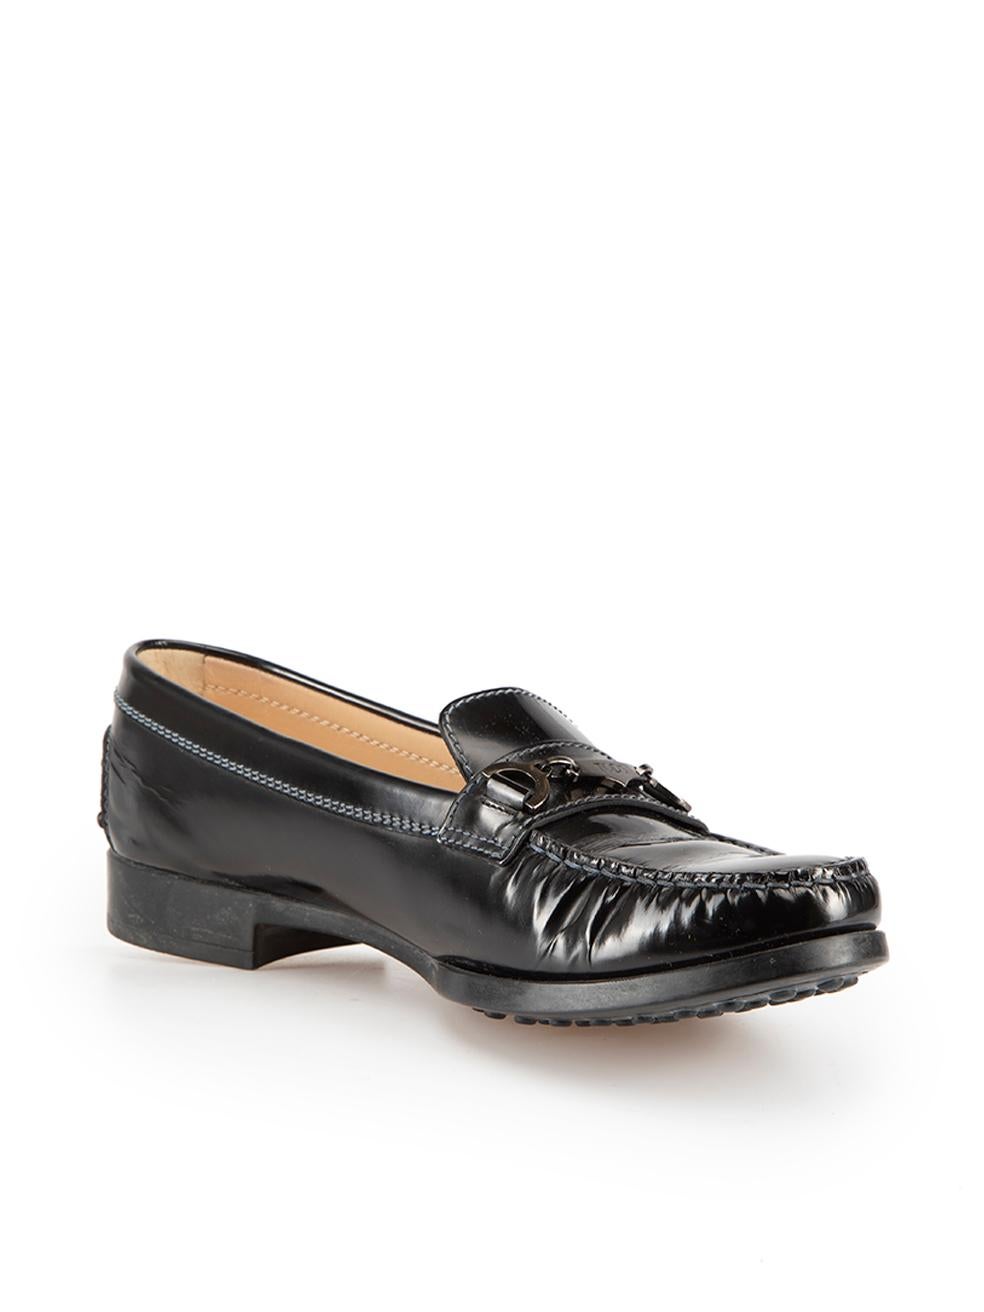 CONDITION is Very good. Minimal wear to shoes is evident. Minimal wear to both shoes with general creasing to the leather and marks to the rubber trim on this used Tod's designer resale item.

Details
Penny model
Black
Patent leather
Slip on